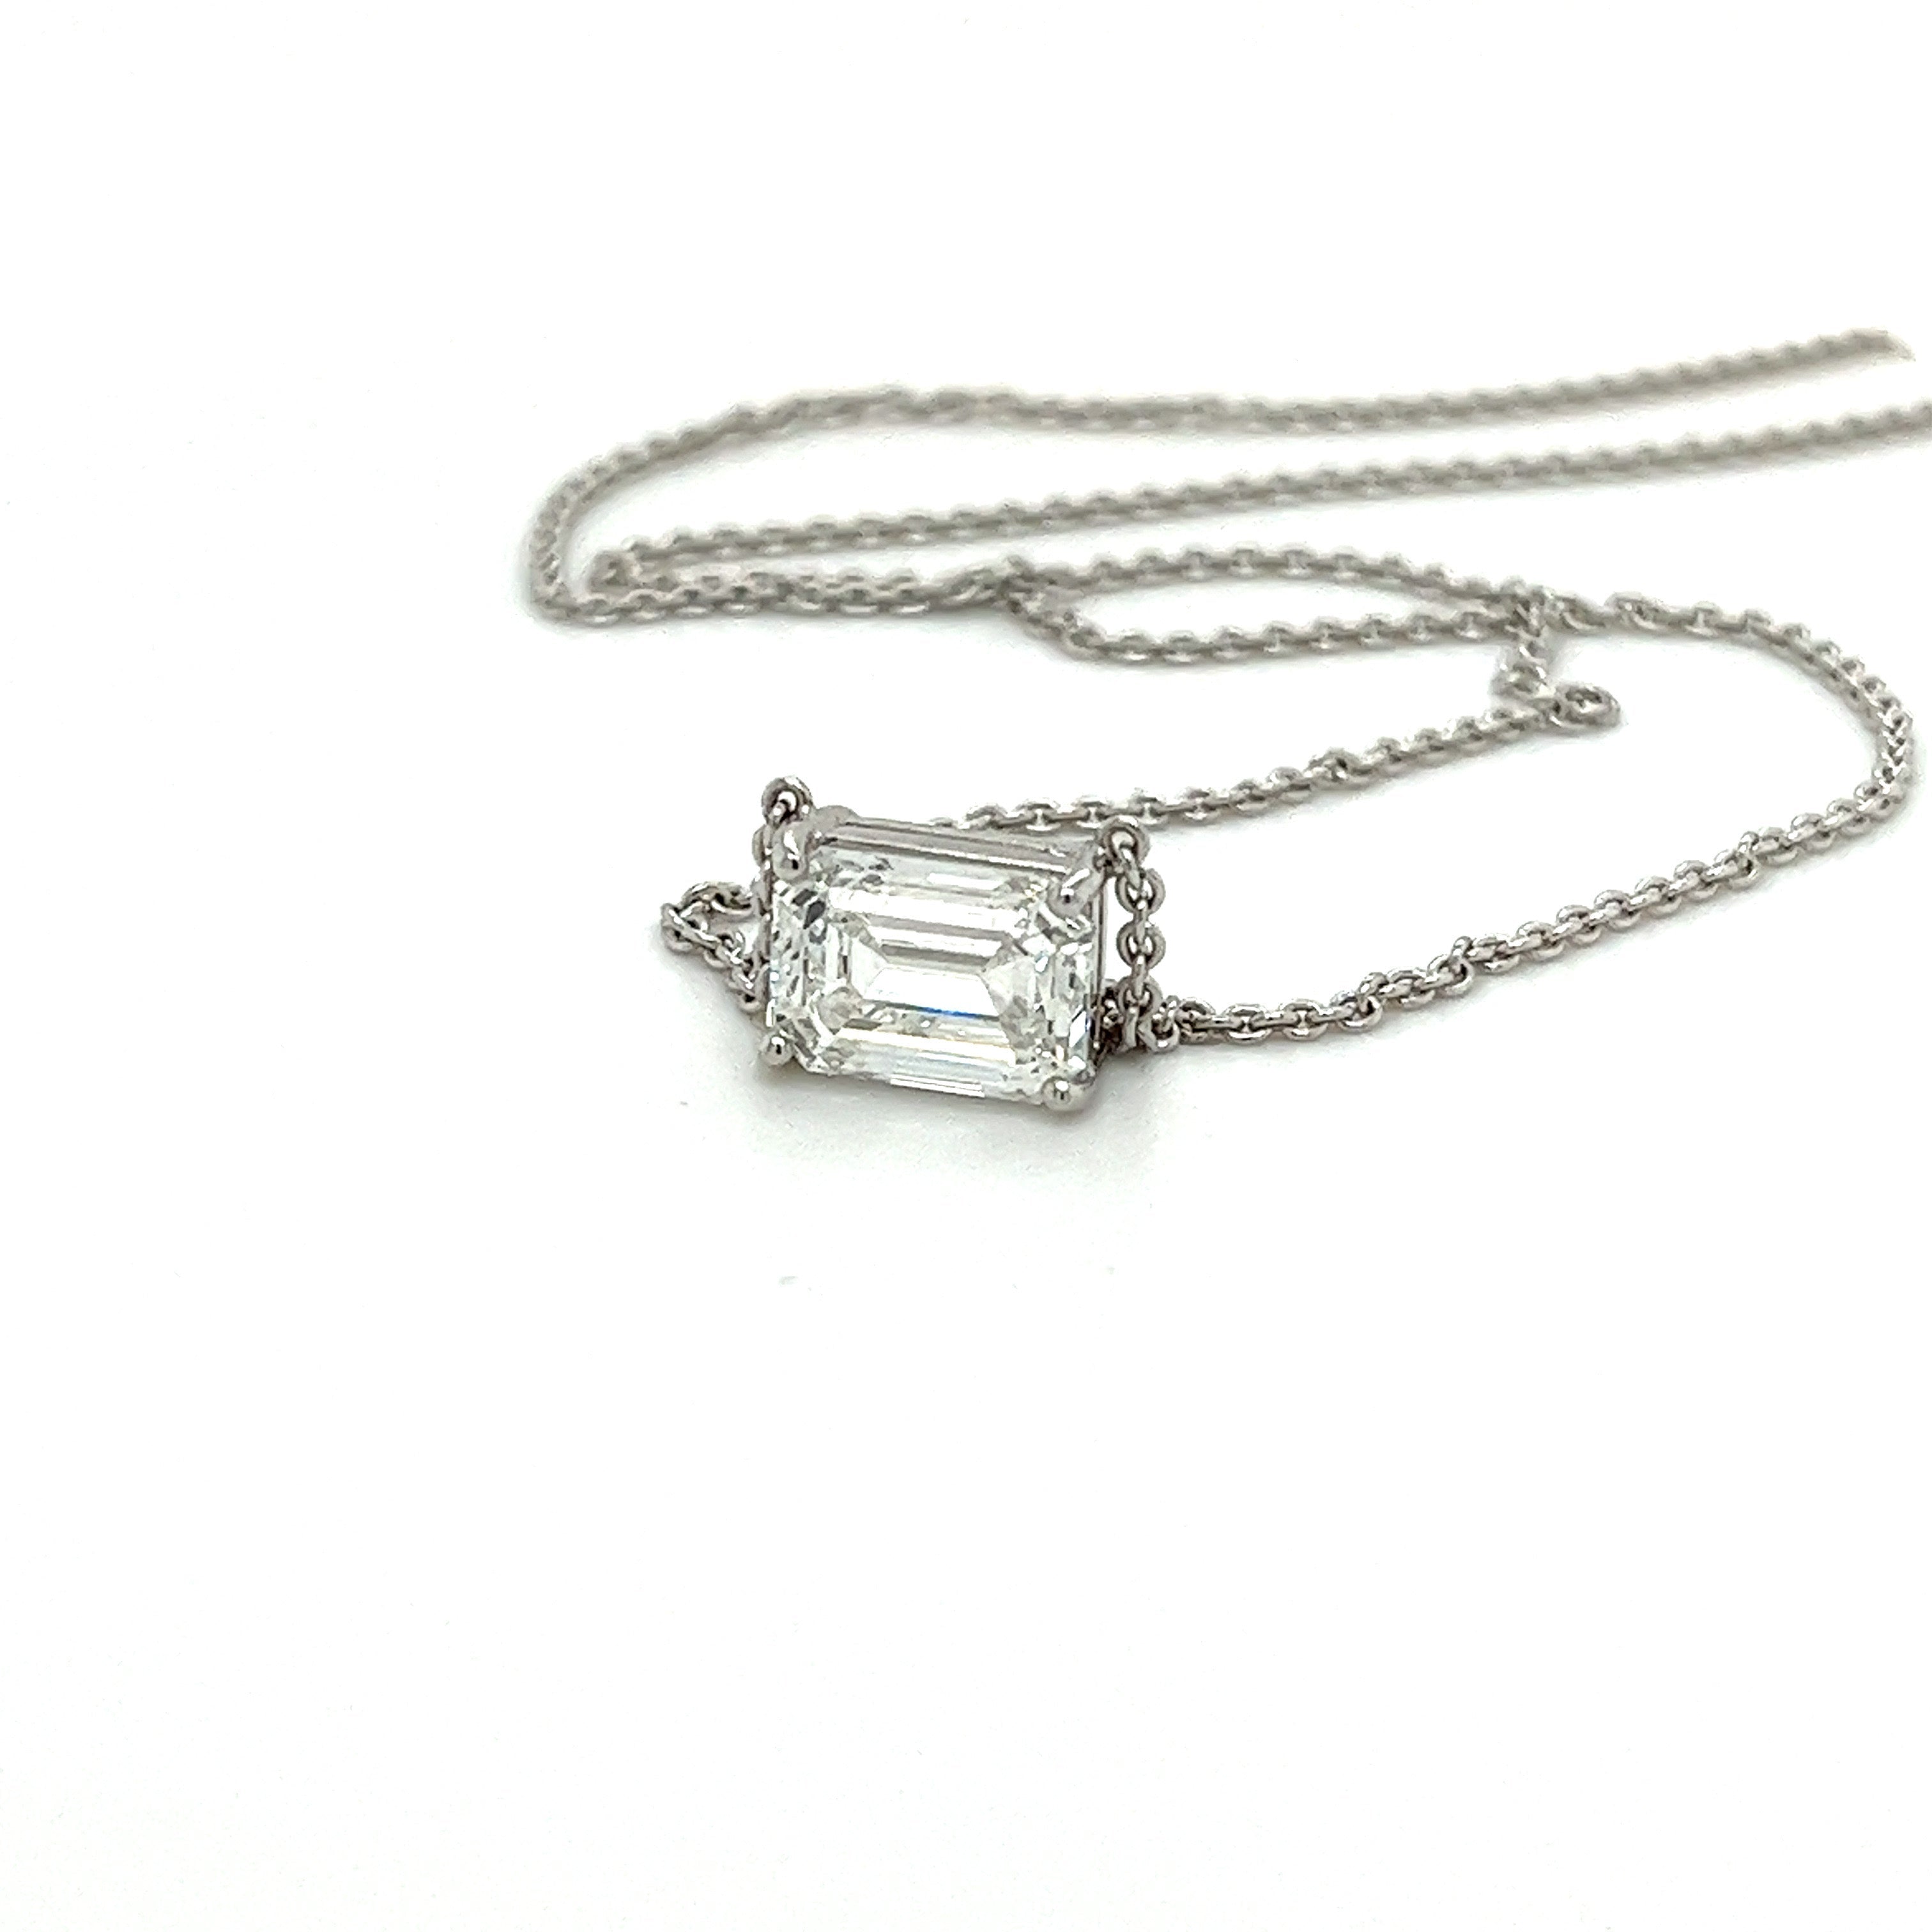 3 Carat Emerald Cut Solitaire Connecting Pendant Necklace in 14K White Gold-Necklaces-ASSAY